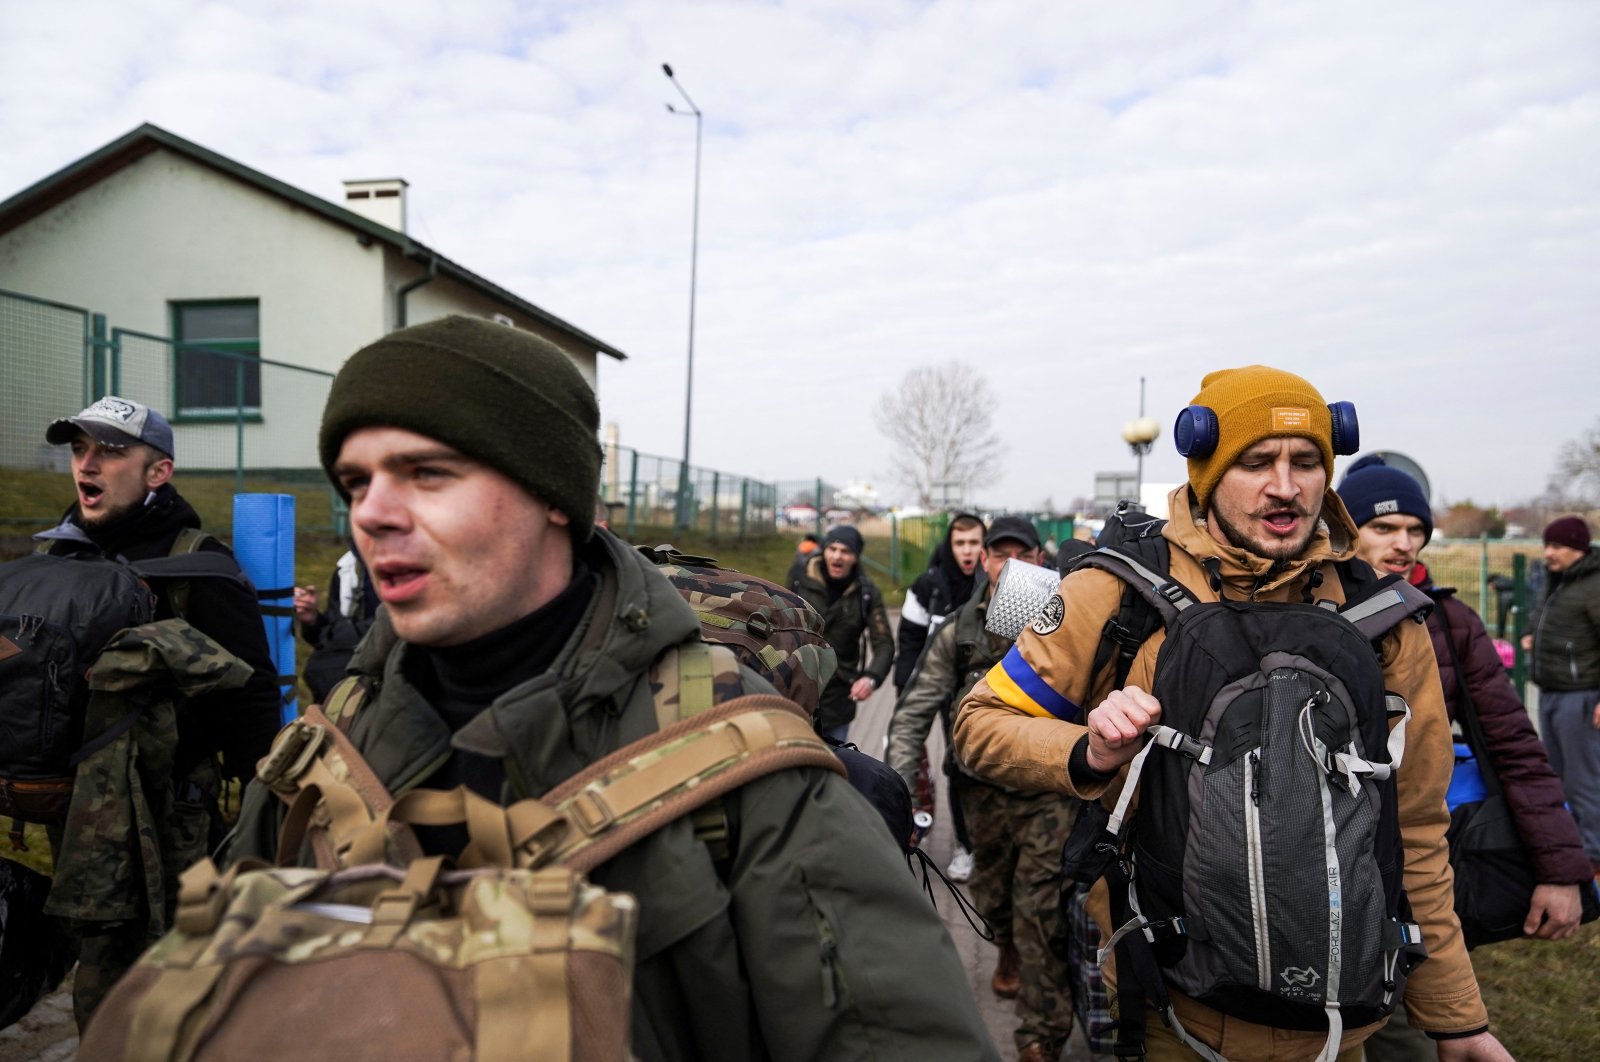 A group of Ukrainian men, returning to Ukraine to help defend against the Russian invasion, enter the border crossing, in Medyka, Poland, Feb. 27, 2022. (Reuters Photo)